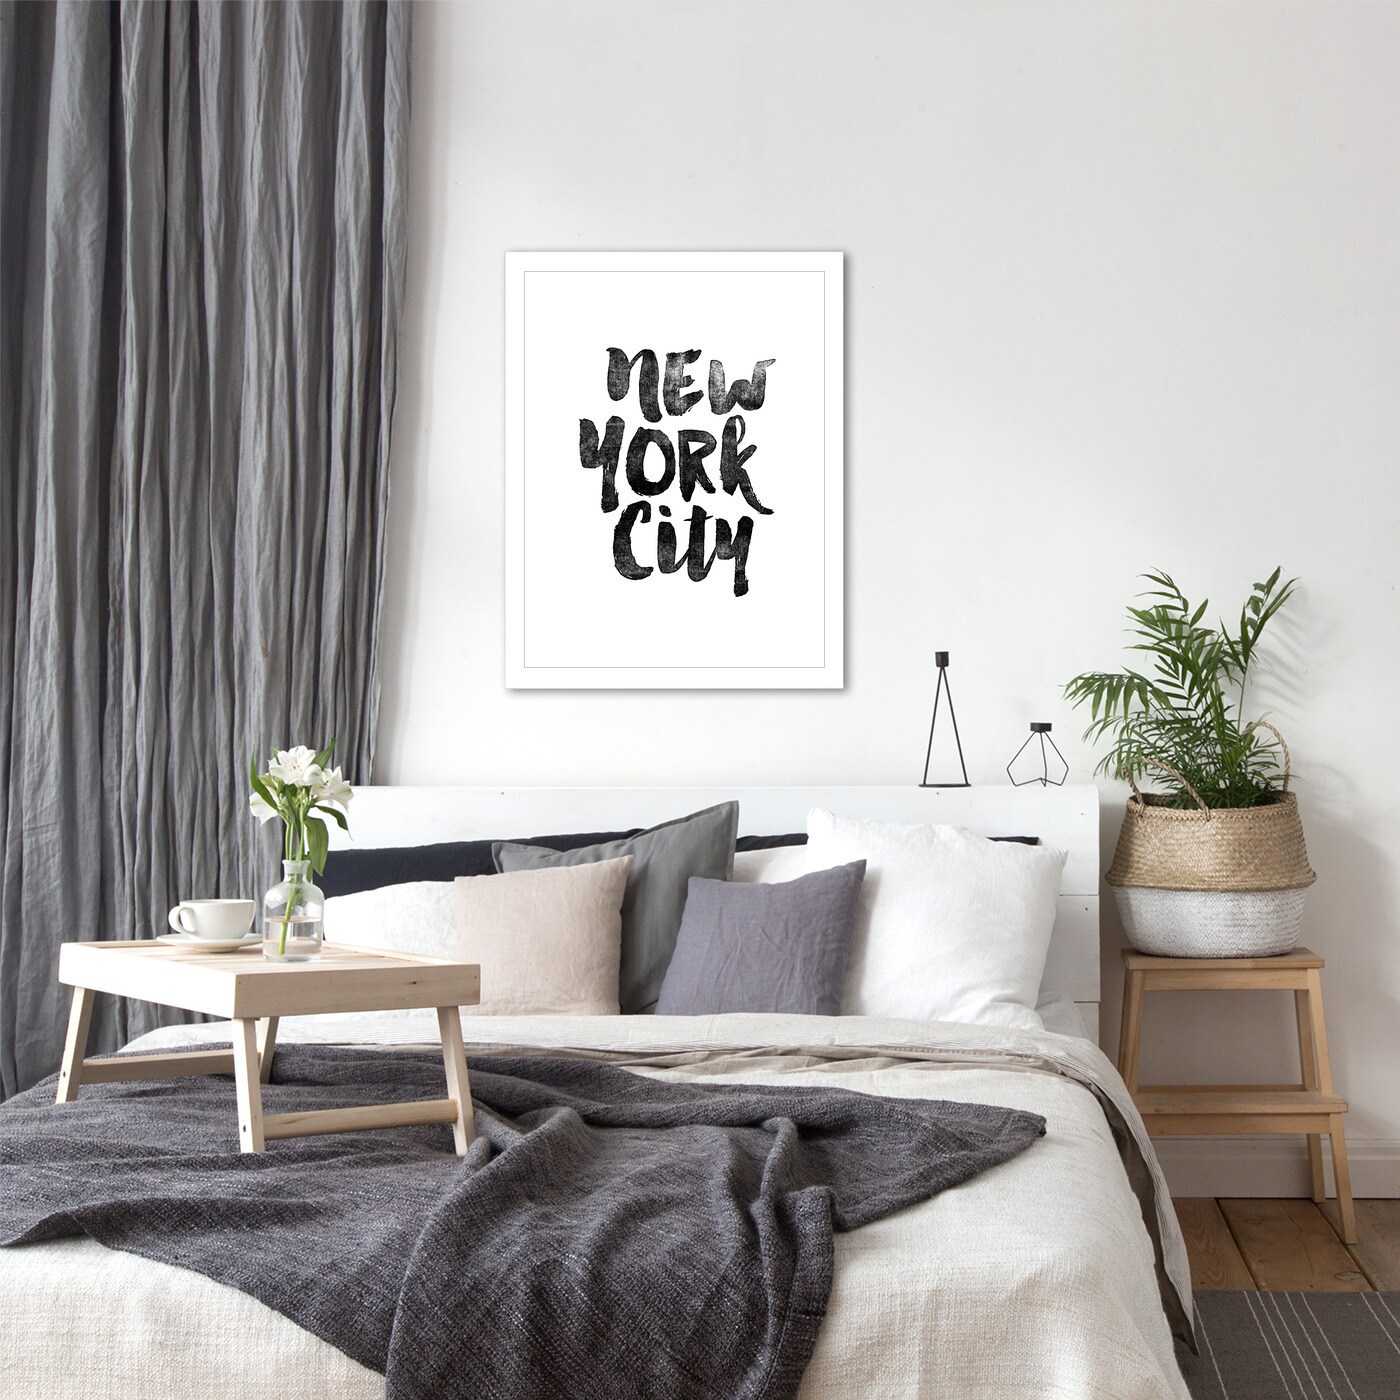 New York City Bw by Motivated Type Frame  - Americanflat